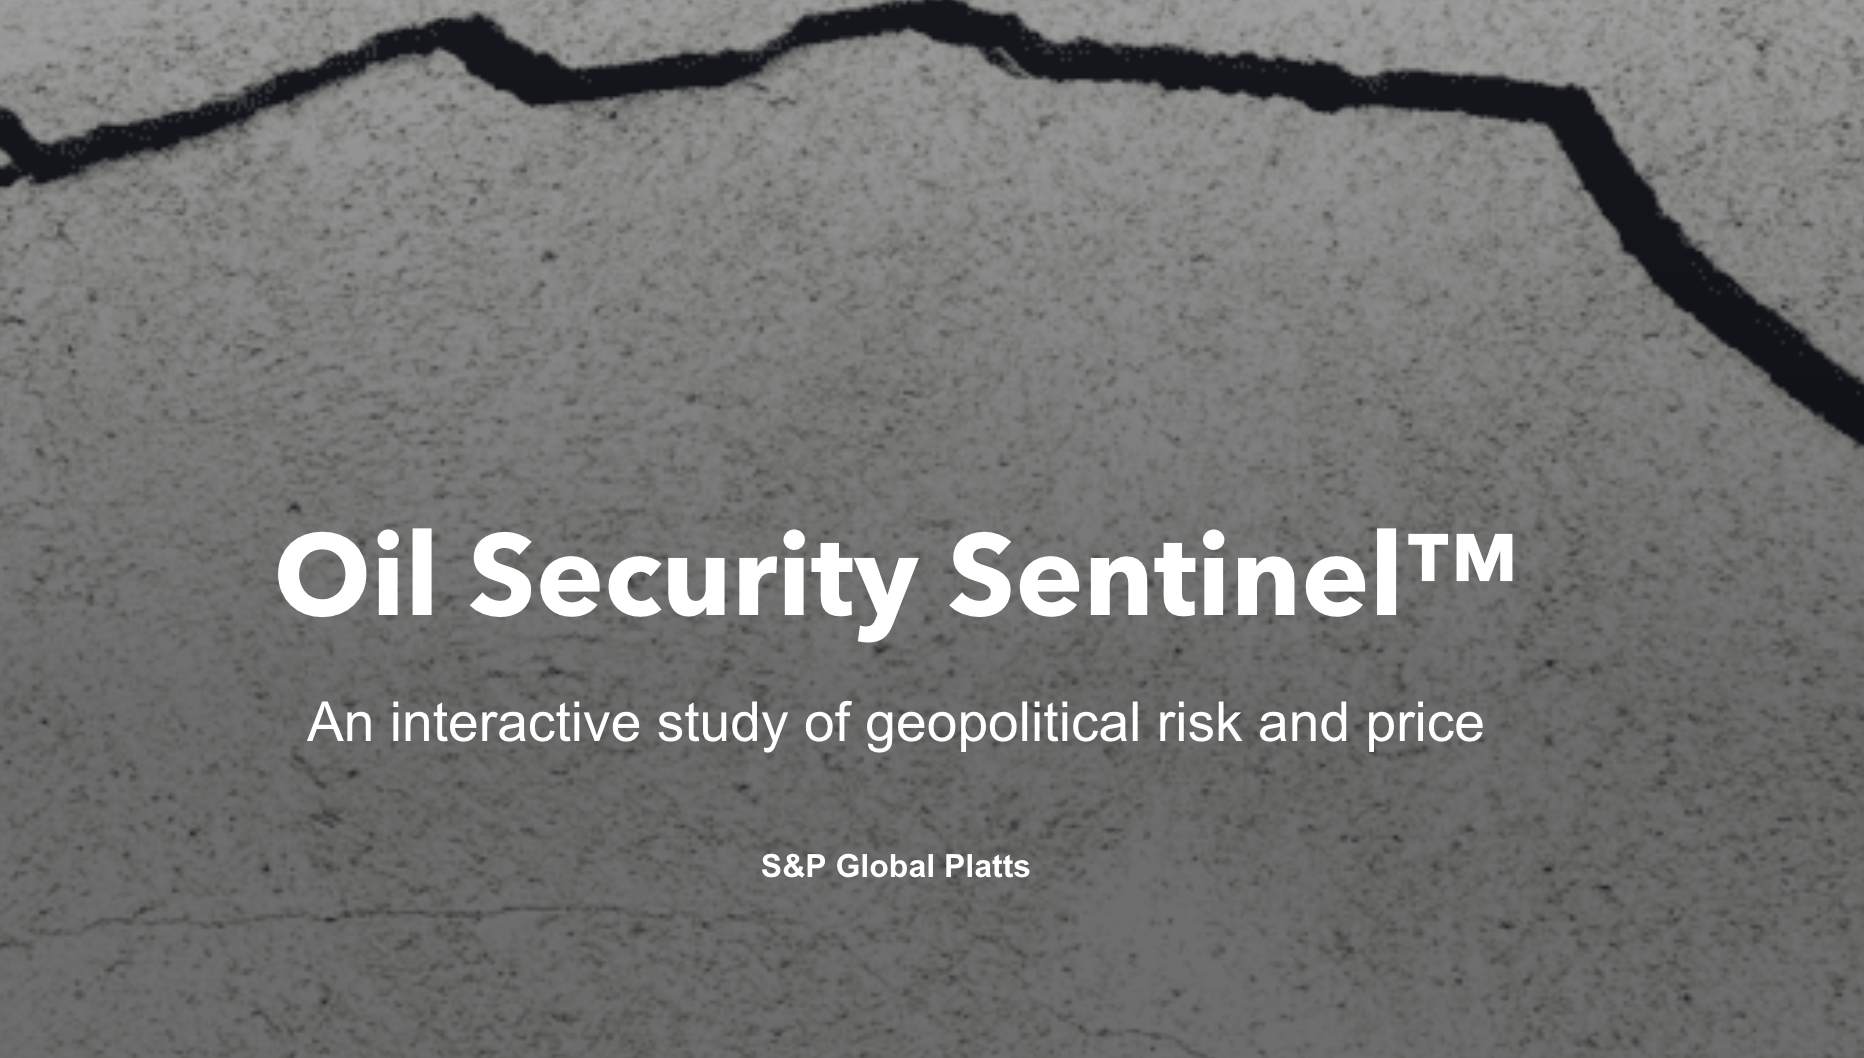 Oil Security Sentinel™: An interactive study of geopolitical risk and price